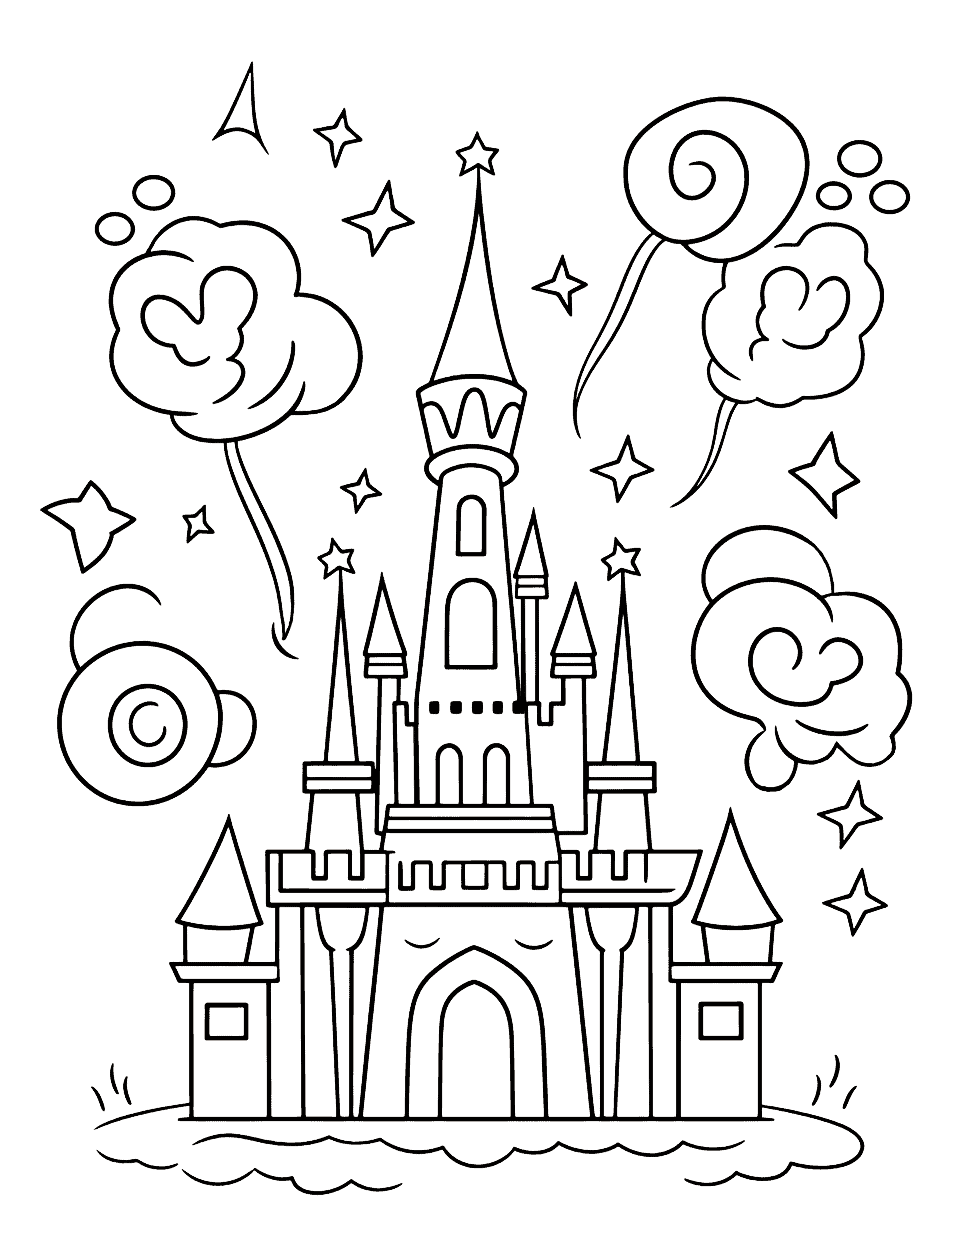 Disney Castle Celebration Happy Birthday Coloring Page - The iconic Disney Castle with fireworks exploding overhead in celebration of a birthday.